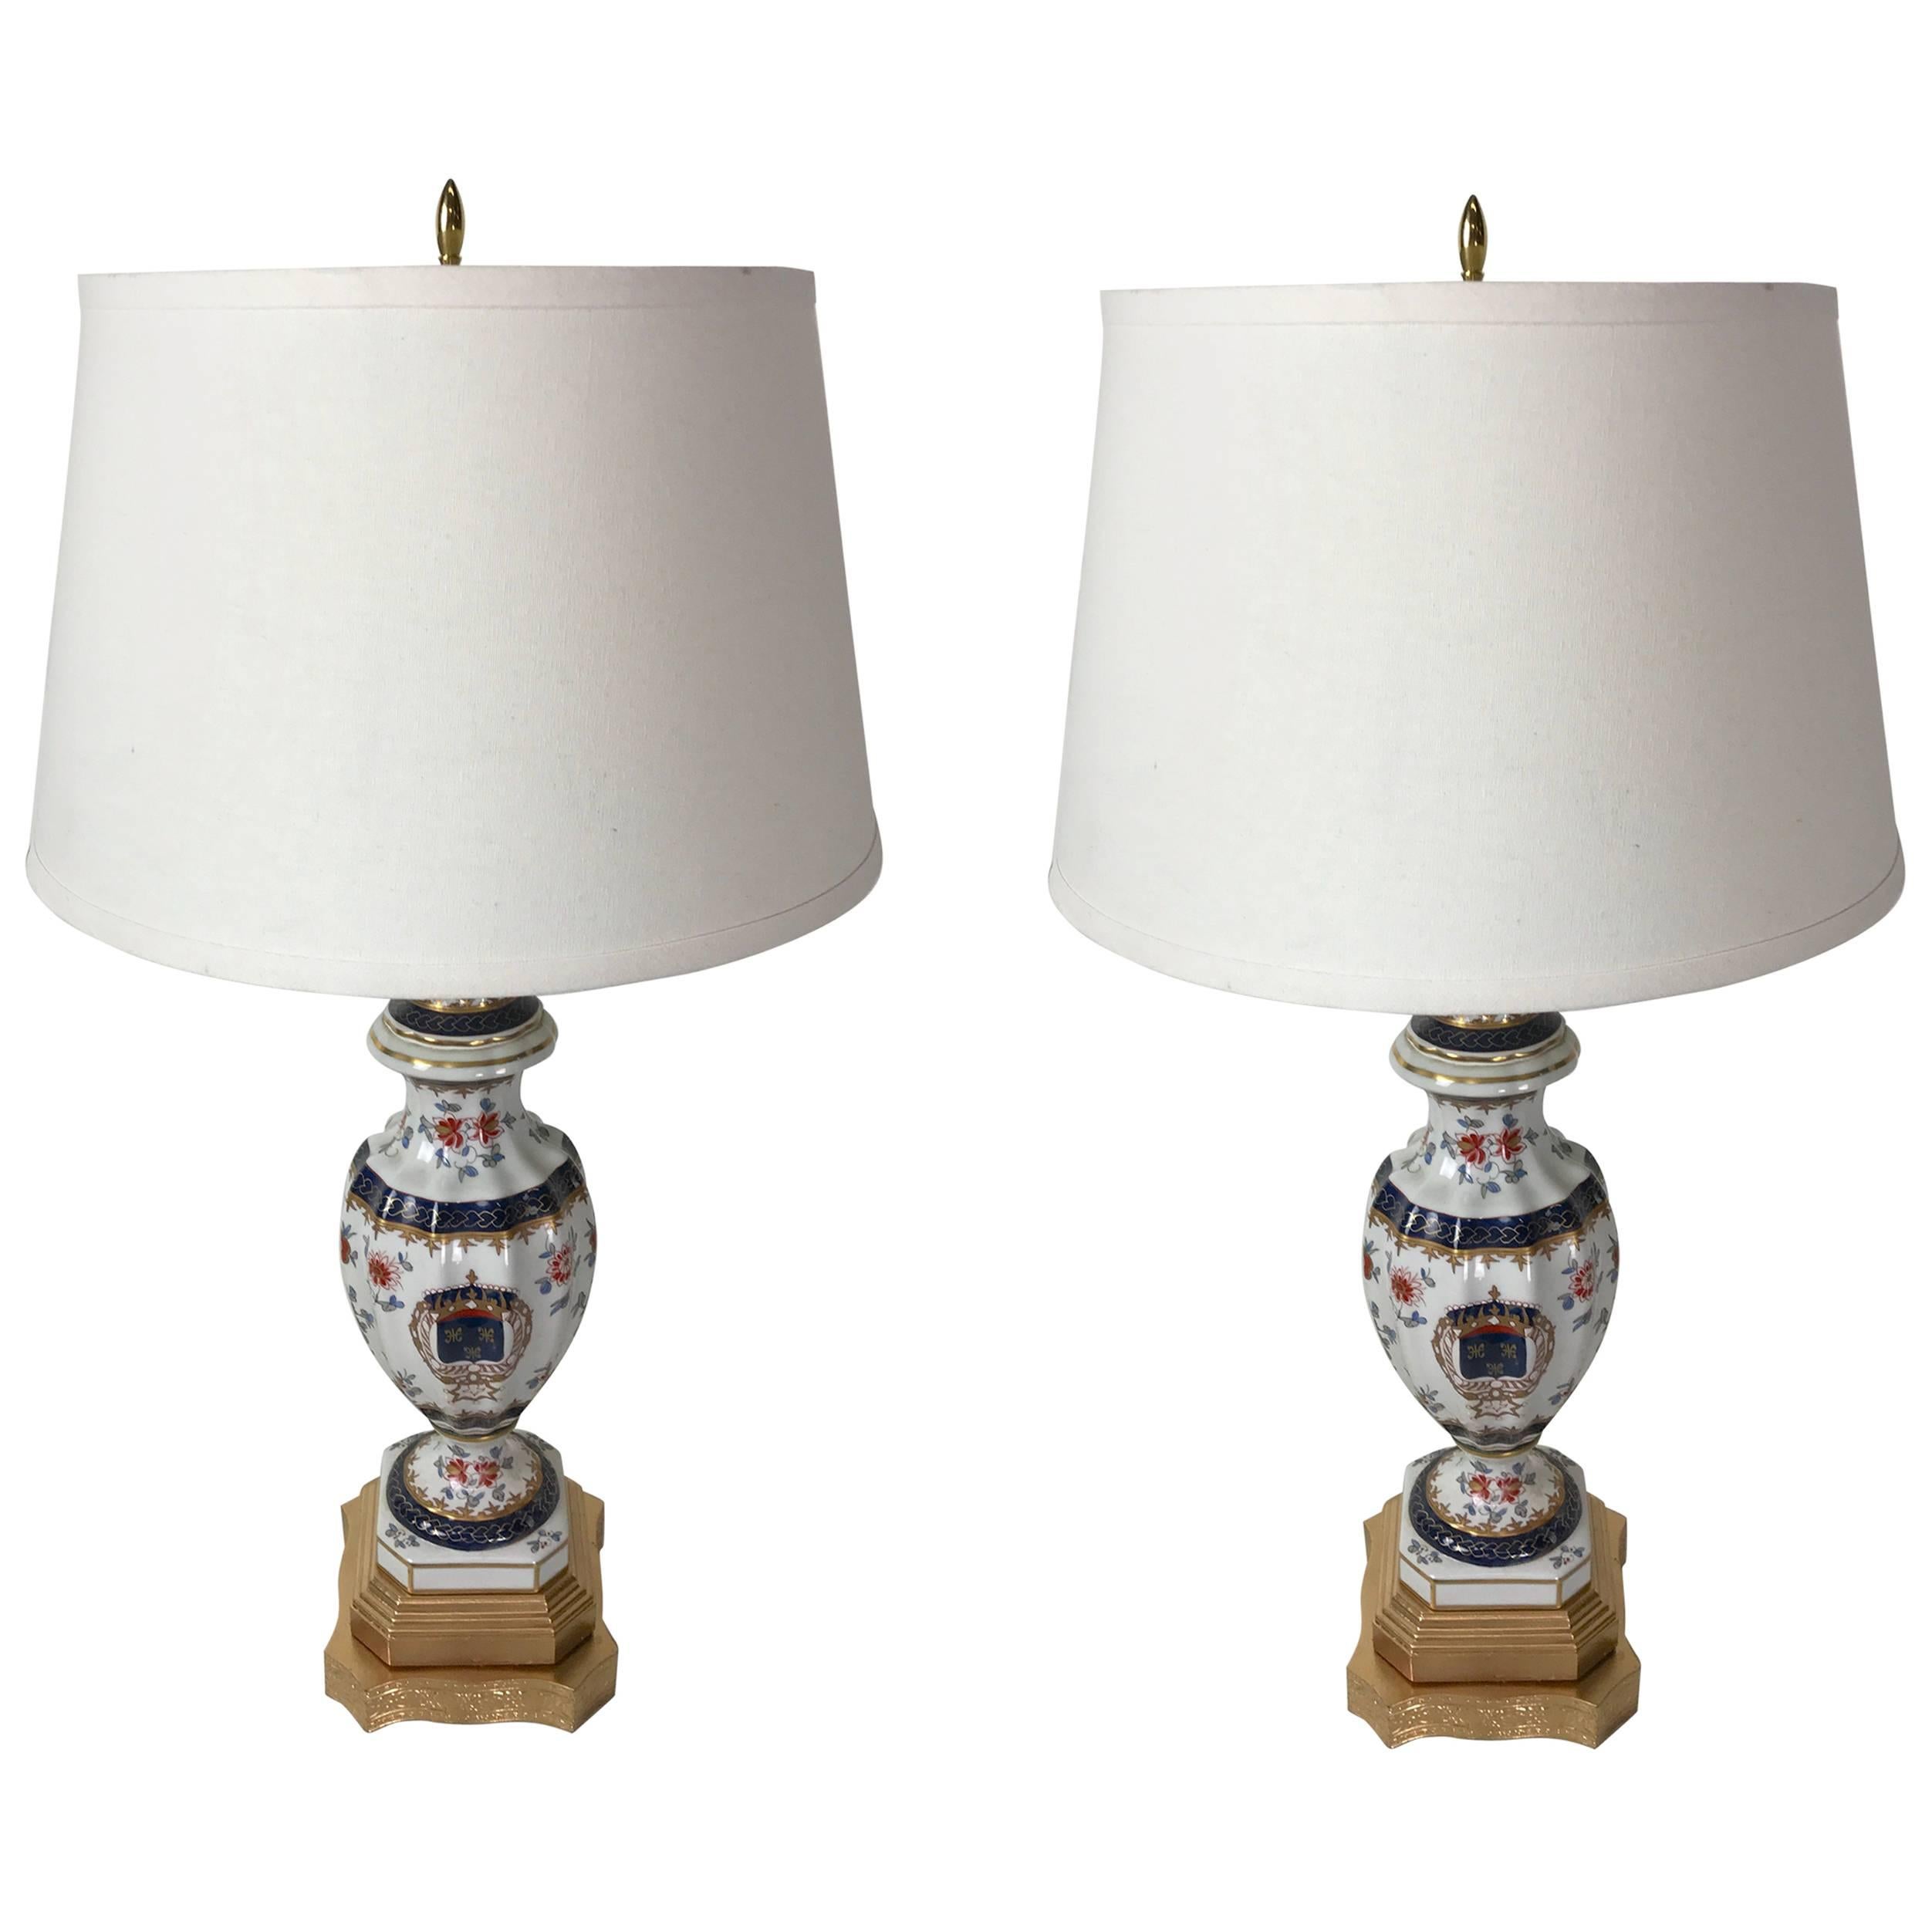 Pair of Samson Armorial Urns, Now as Lamps